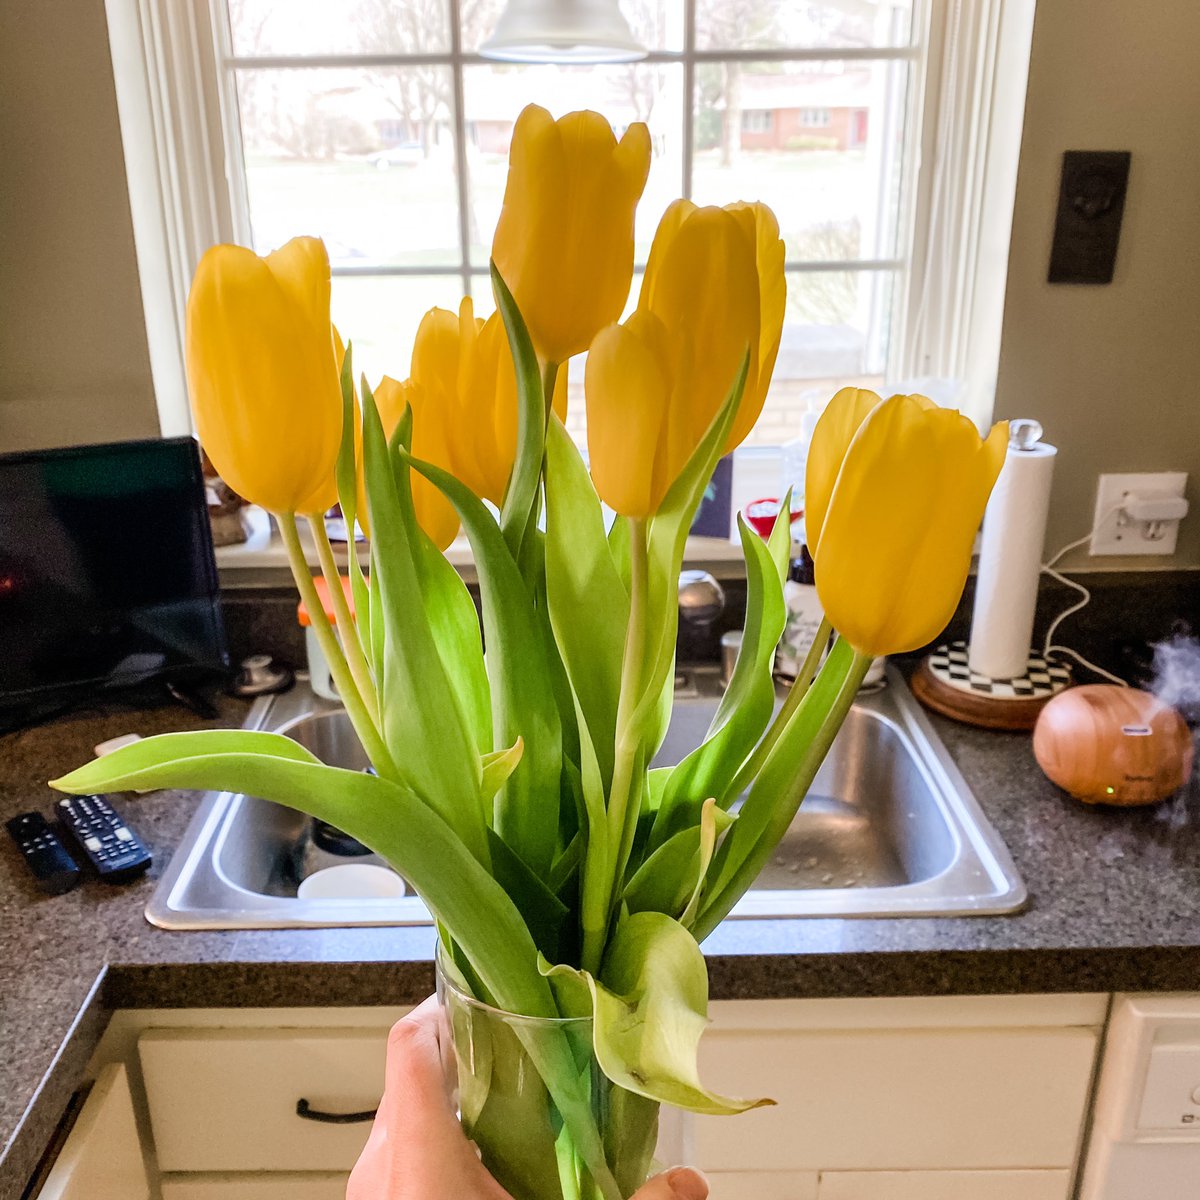 • fresh cut flowers  I have been buying them when I grocery shop and they really have brightened my kitchen and my day! [This is from yesterday but forgot to post it!]